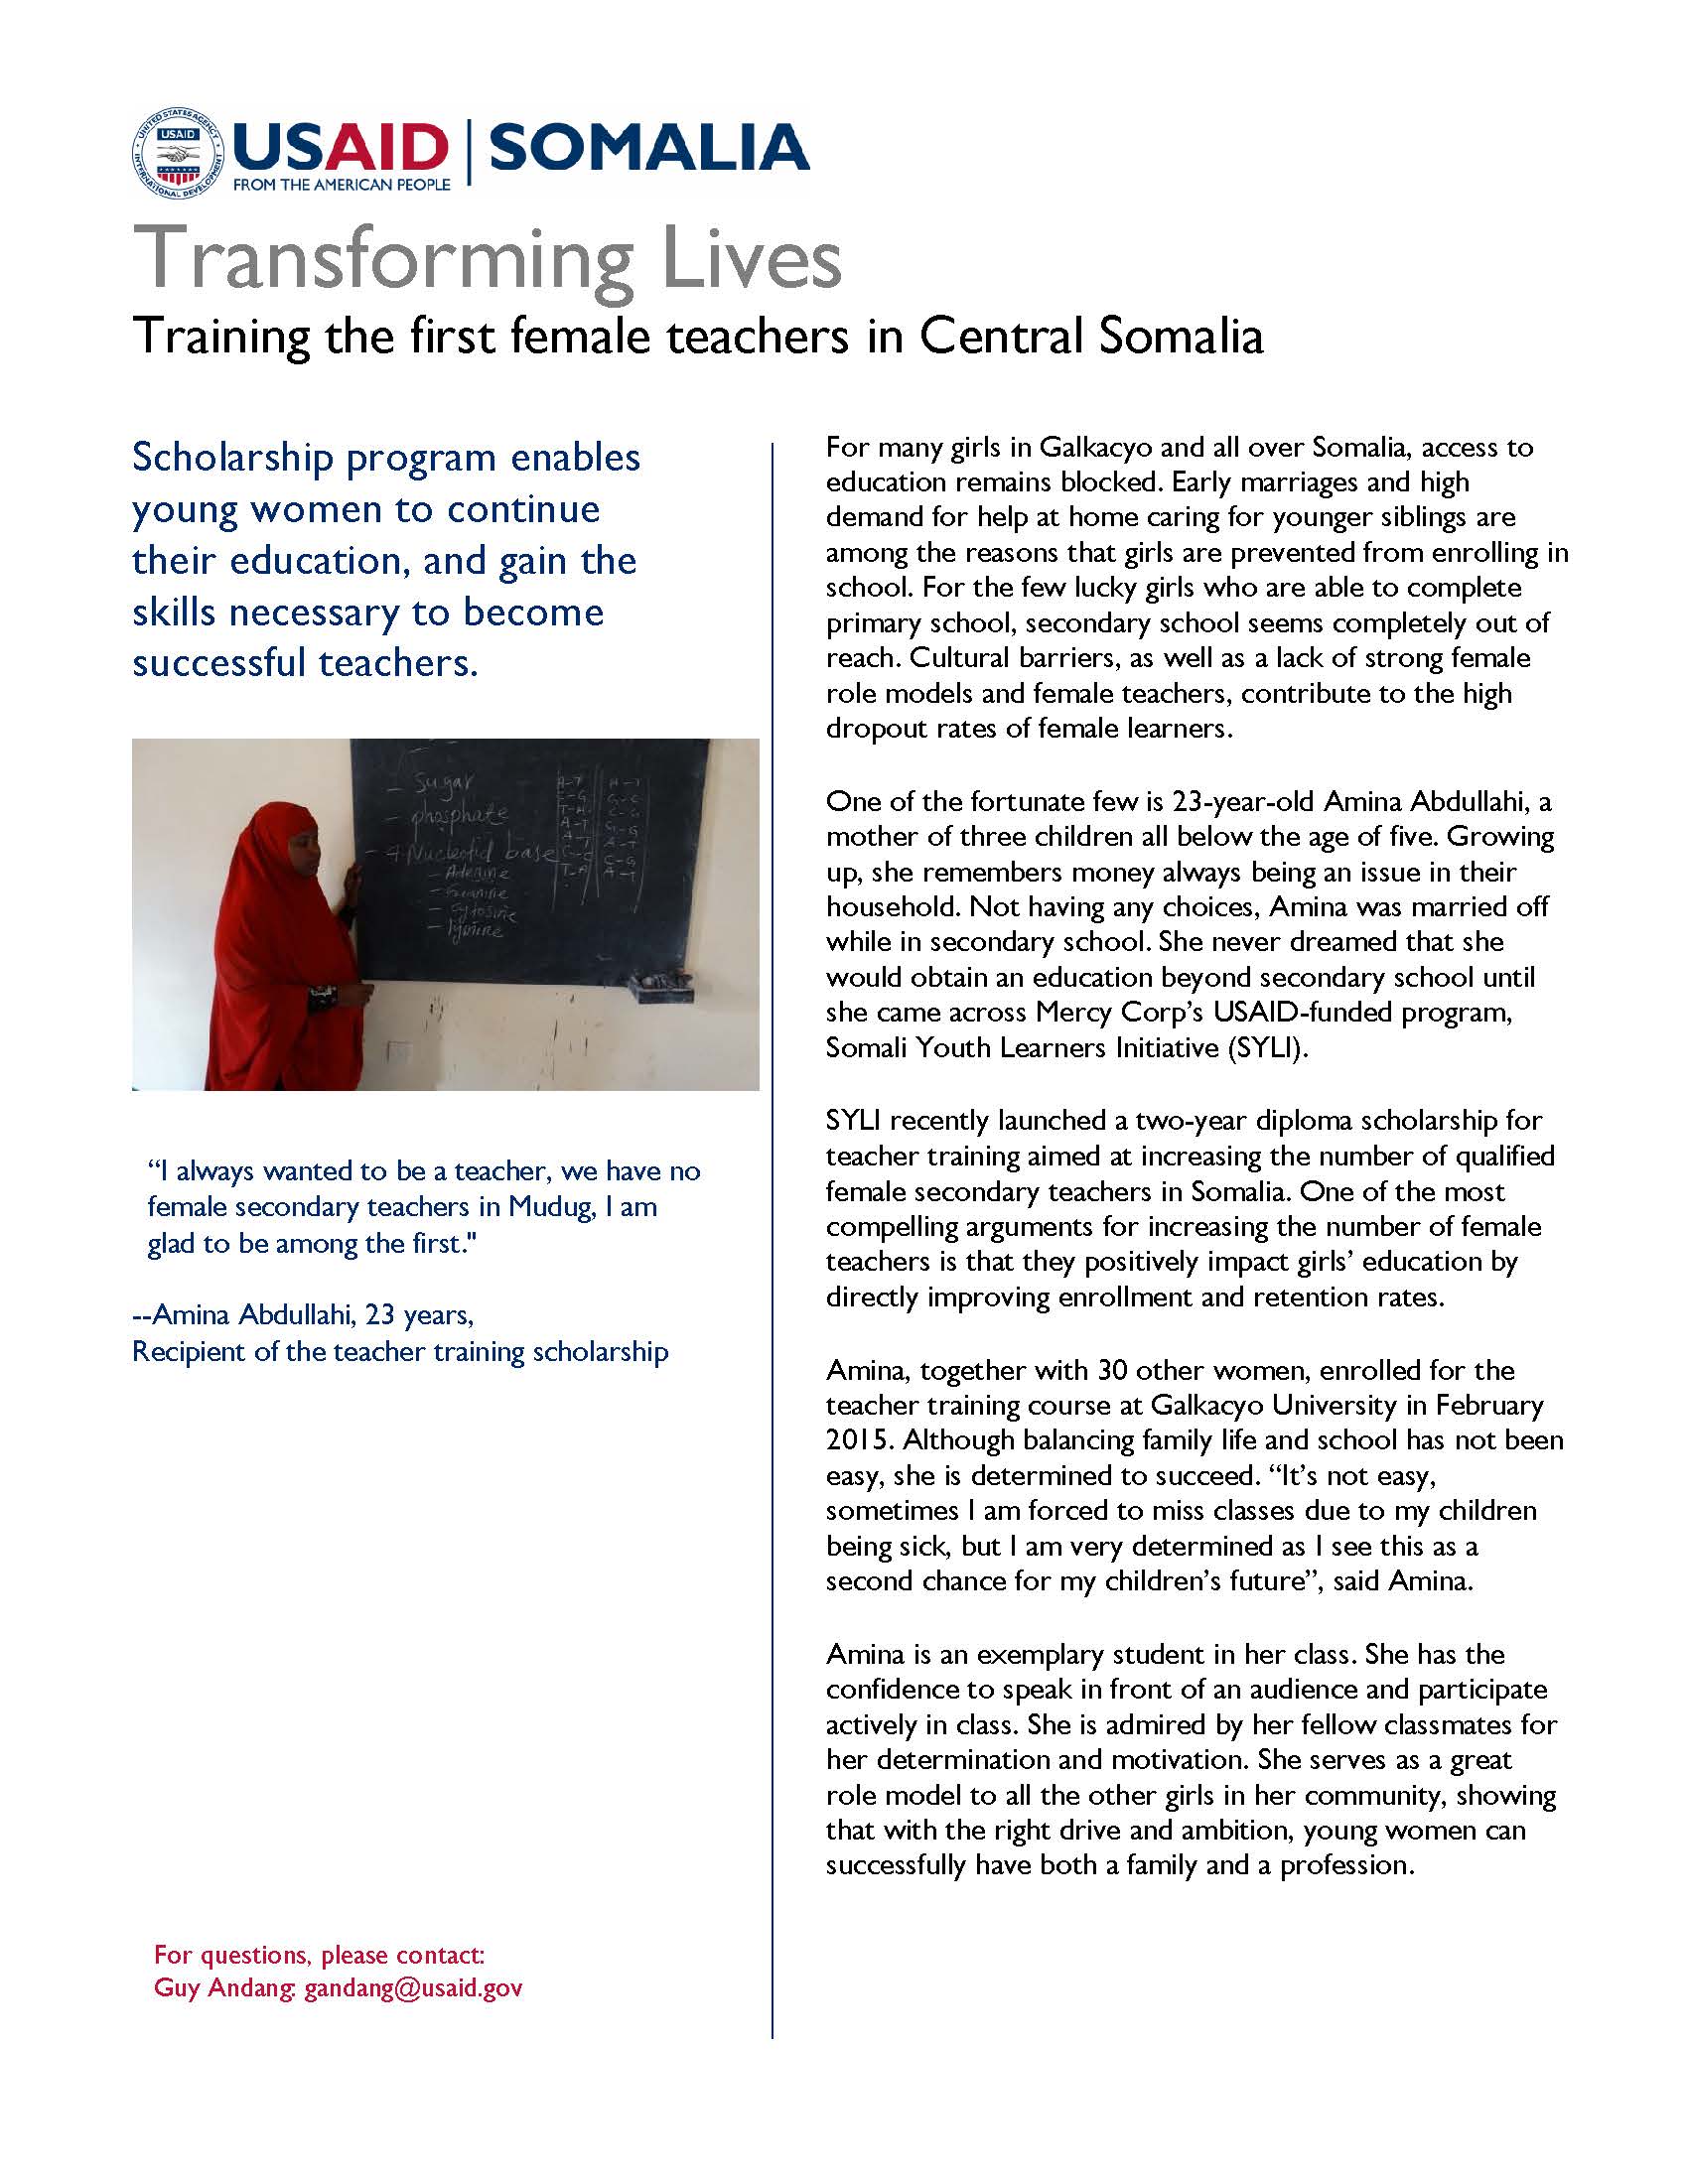 Training the first female teachers in Central Somalia